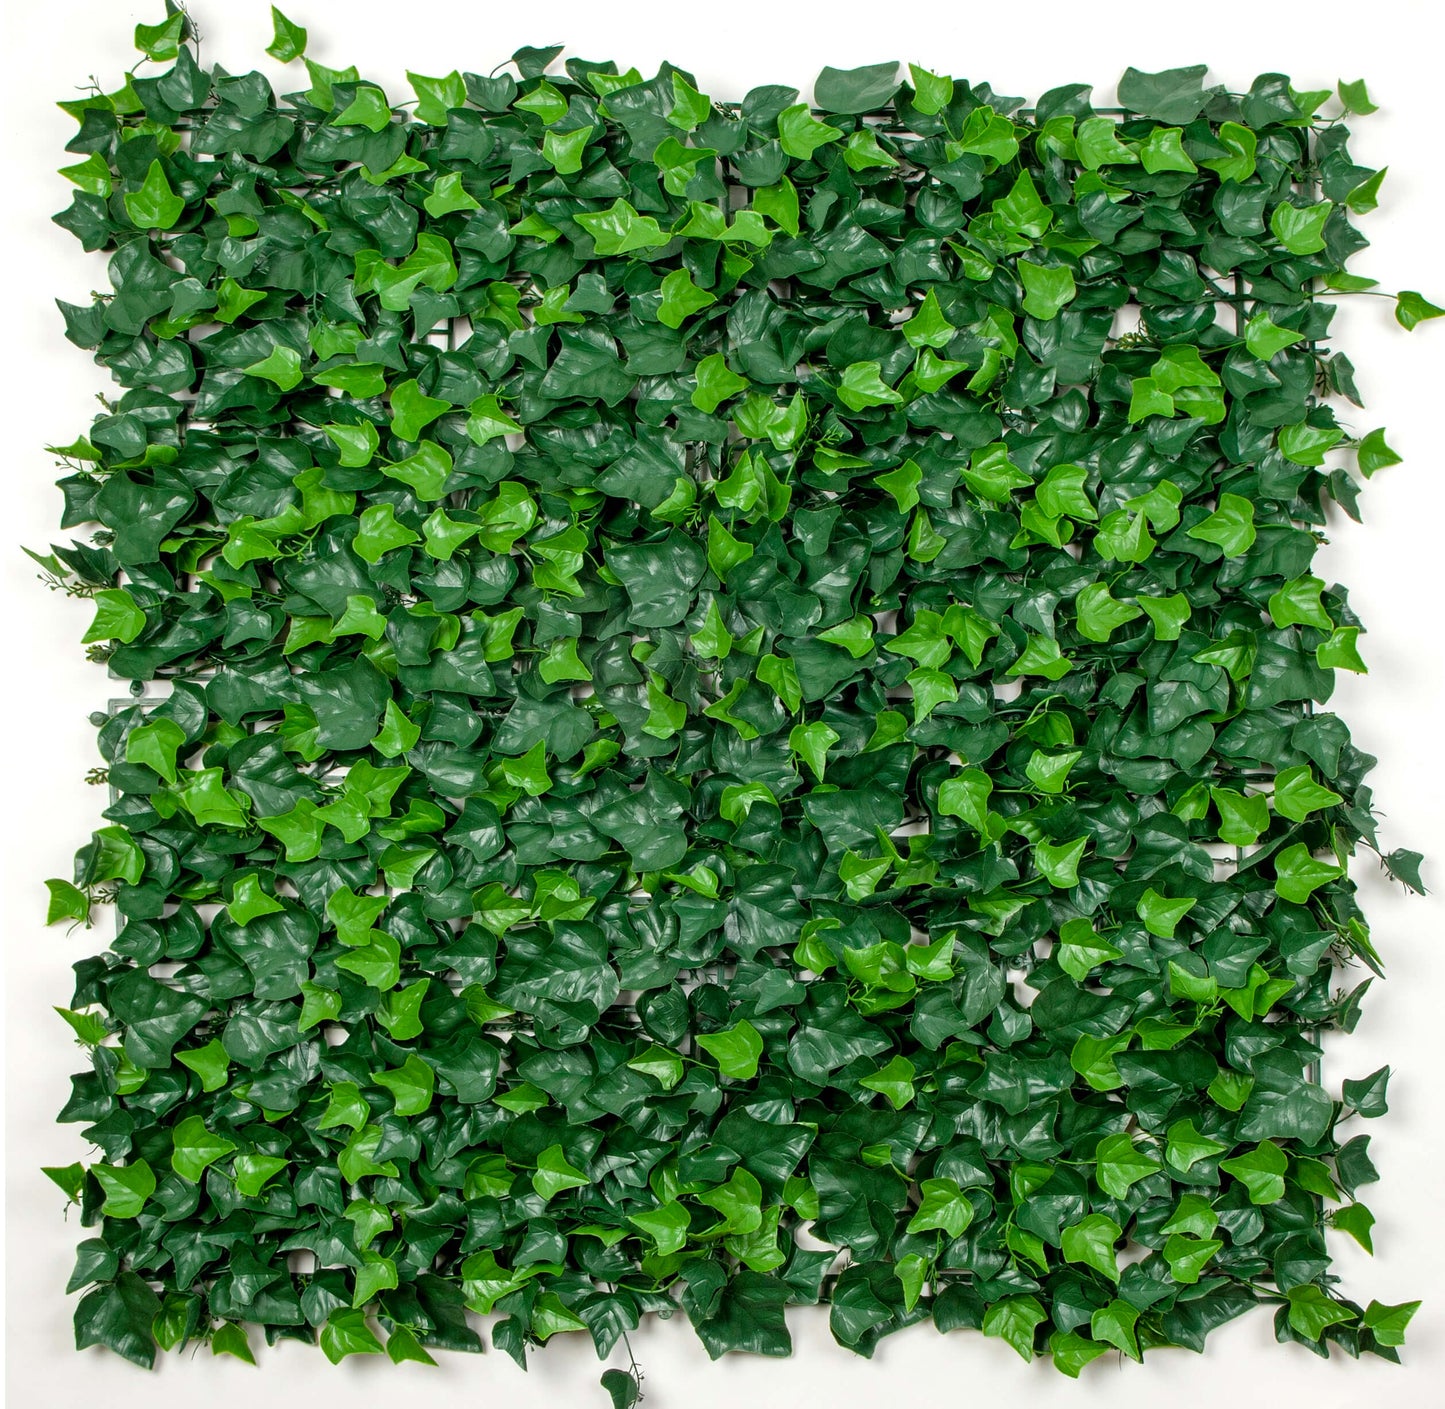 Artificial Boston Ivy Green Wall 33SQ FT UV Resistant